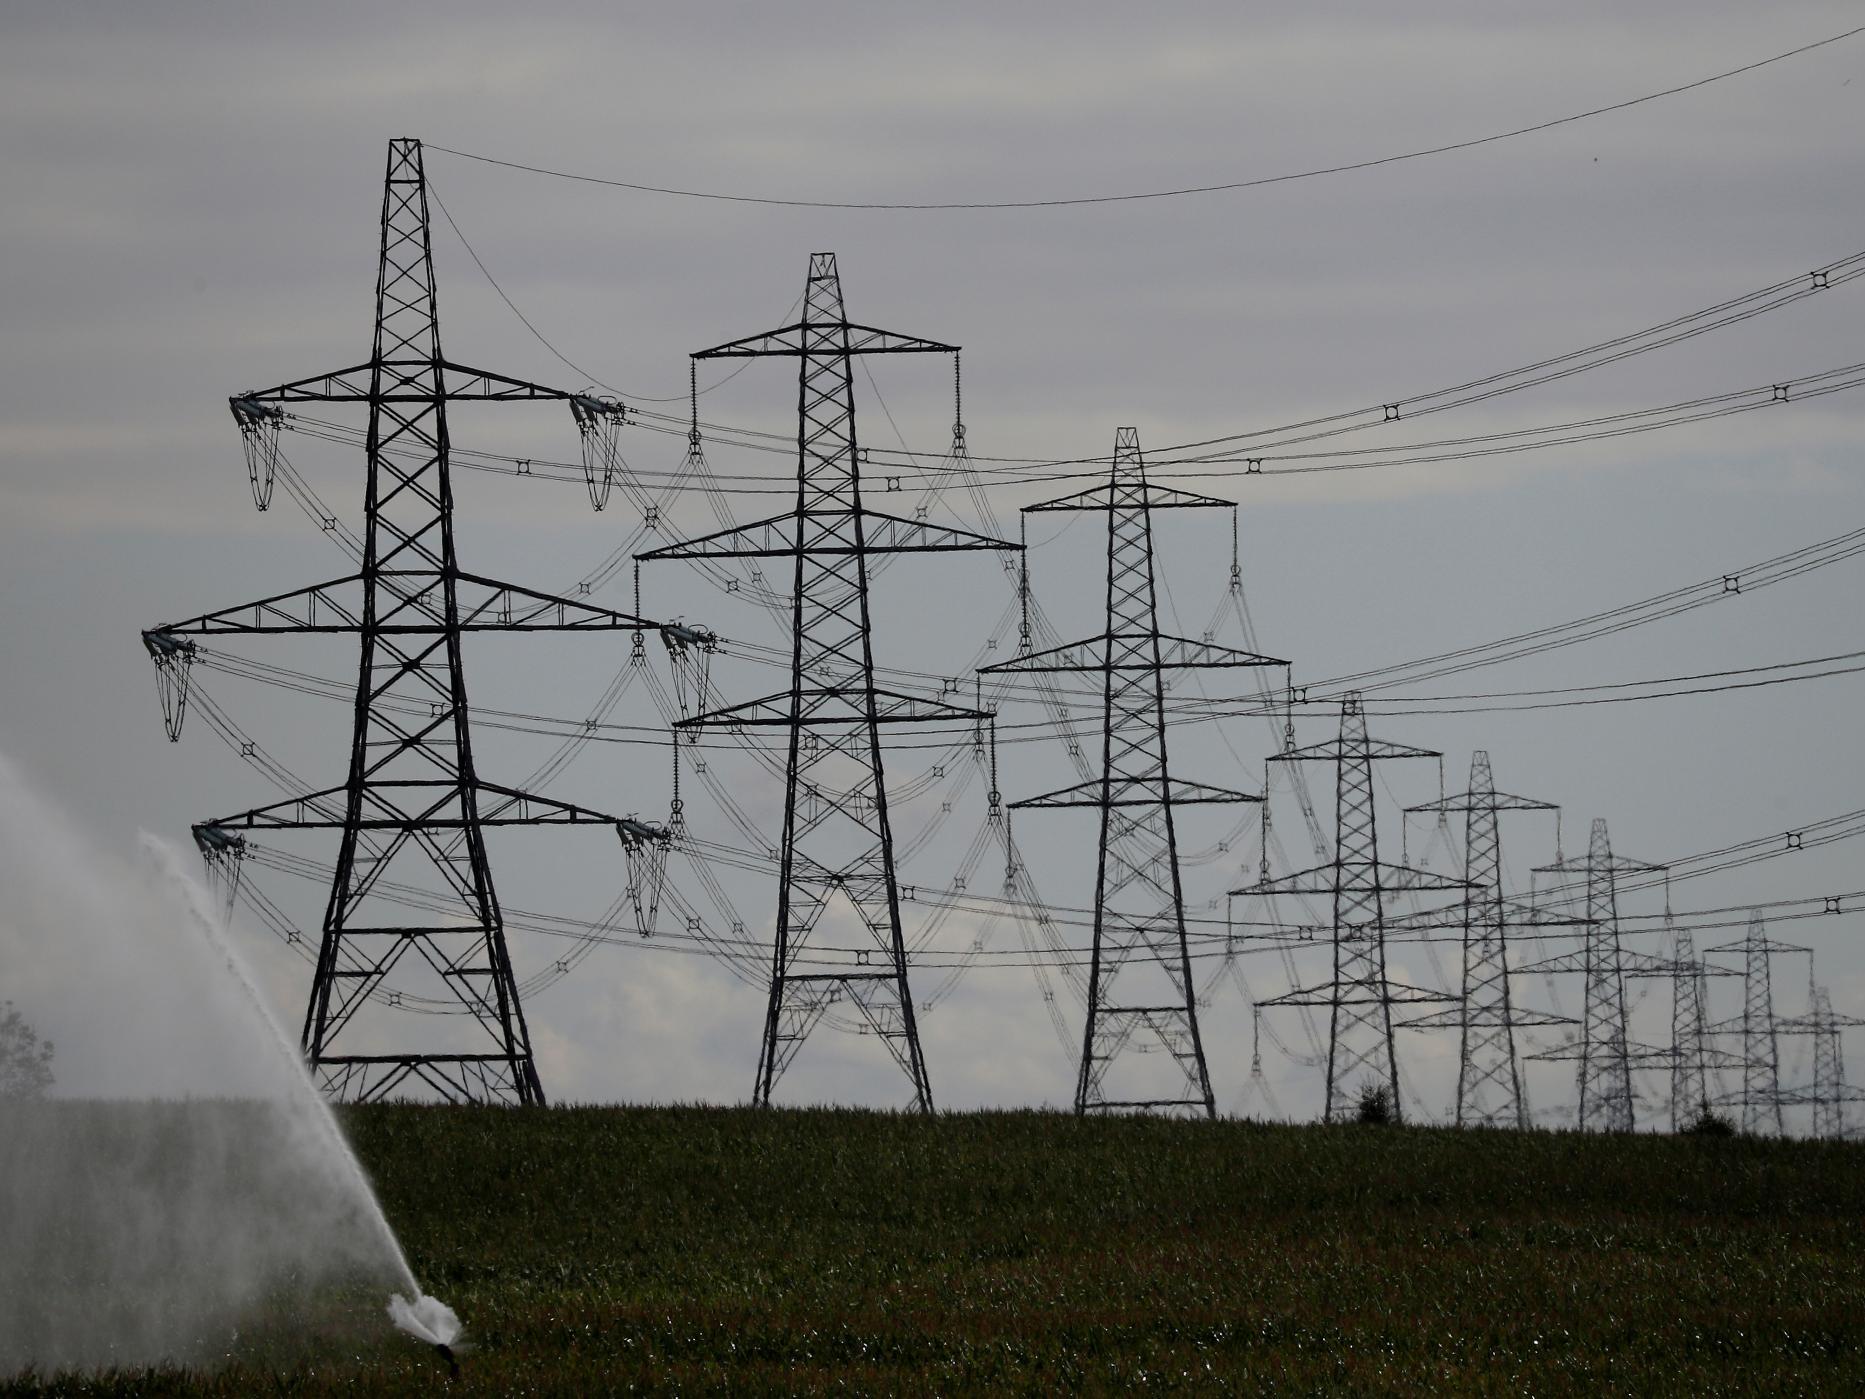 The merger will mean the UK's Big Six energy providers are reduced by one